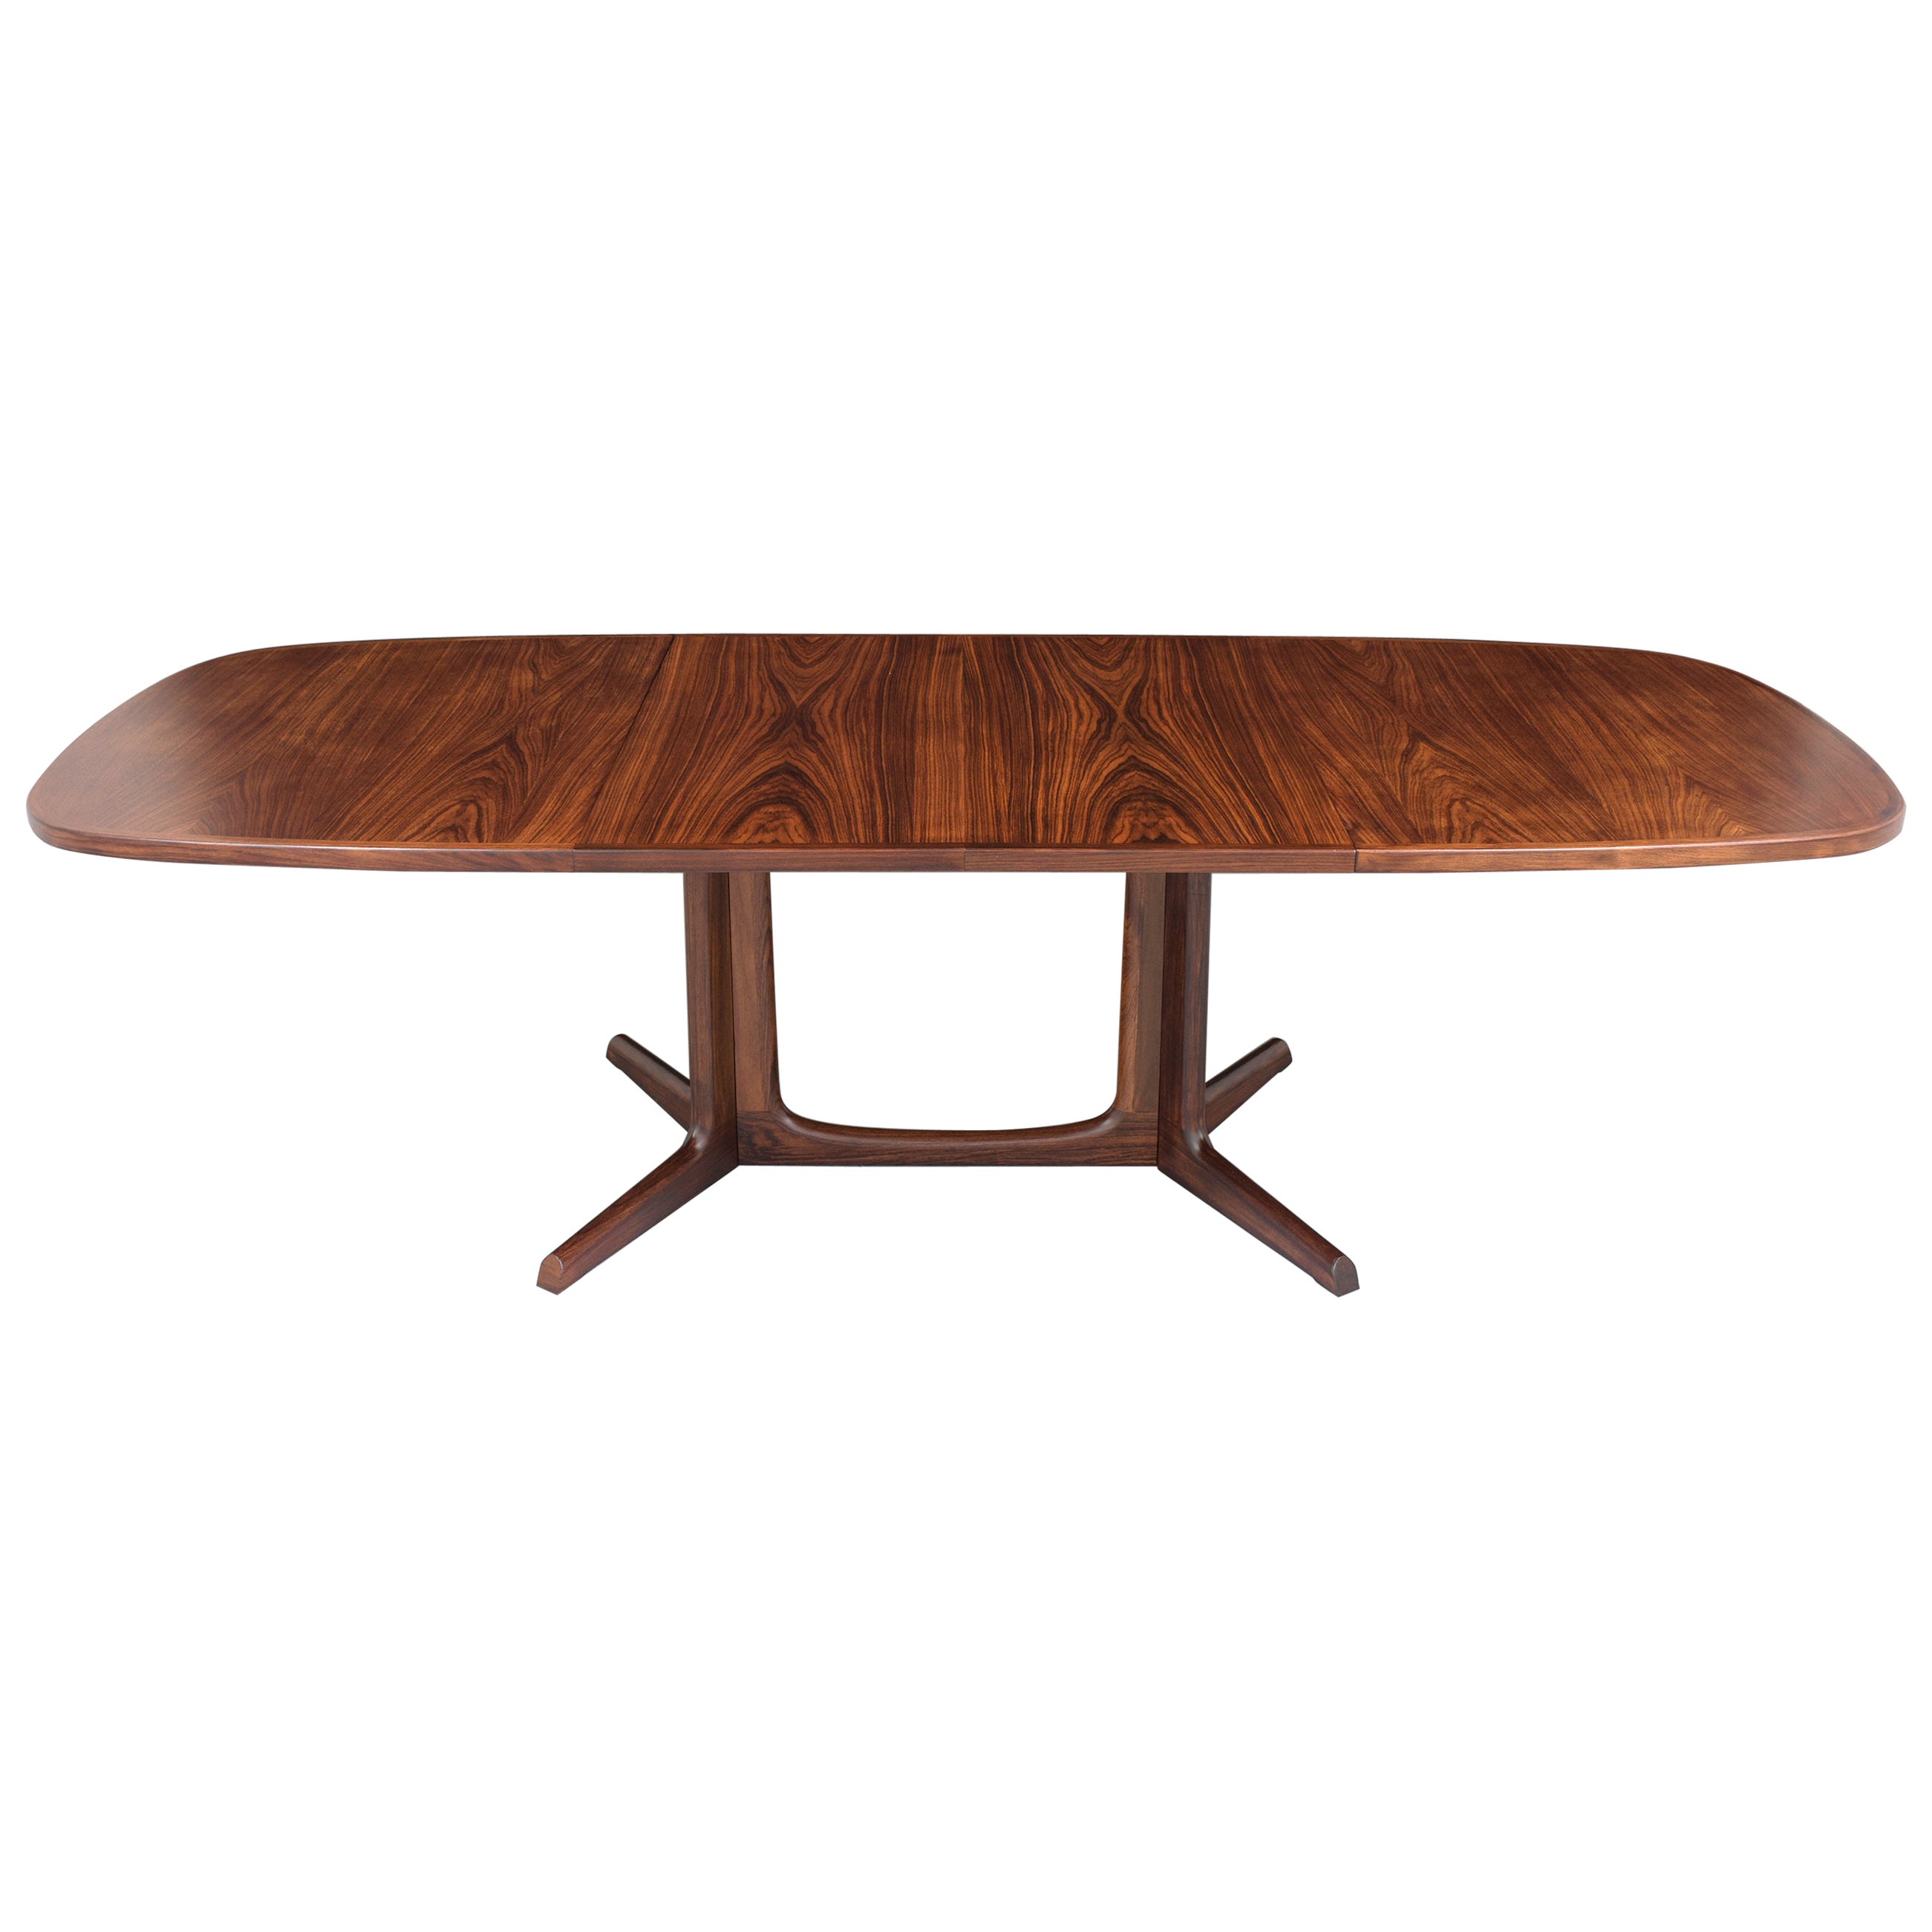 Danish Modern Rosewood Extendable Dining Table